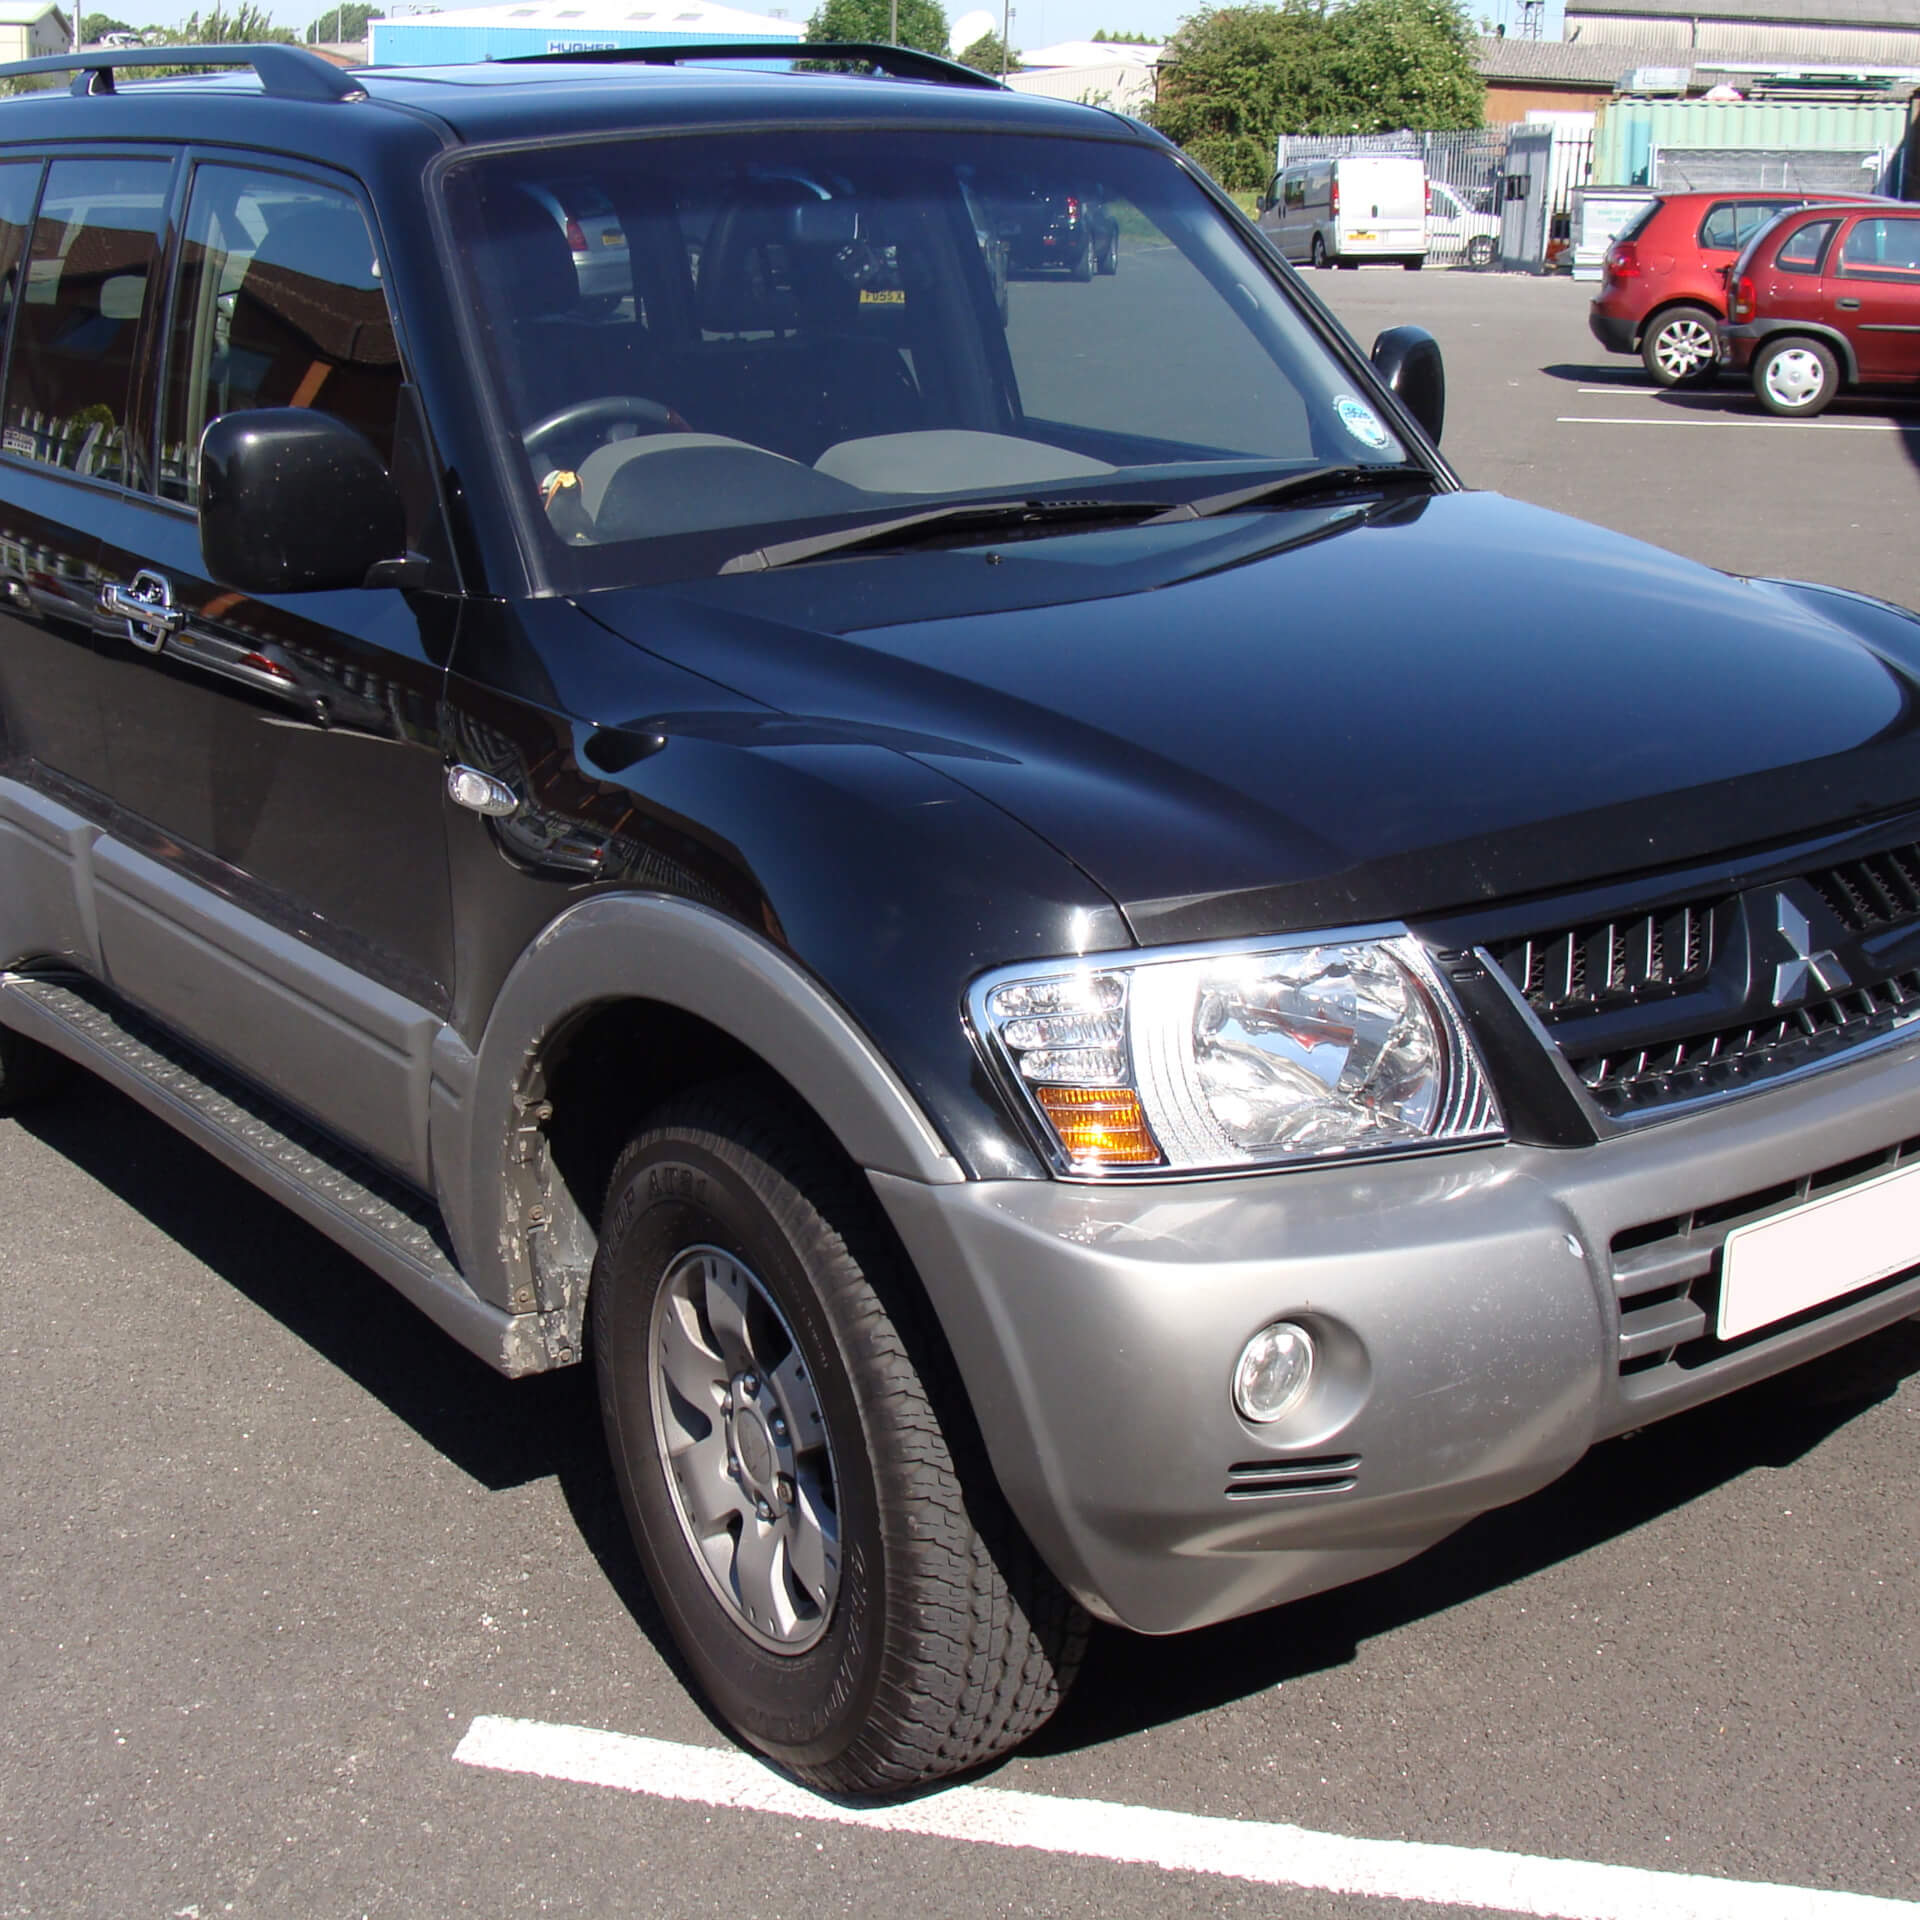 Direct4x4 accessories for Mitsubishi Shogun vehicles with a photo of a black and silver Mitsubishi Shogun parked in a car park